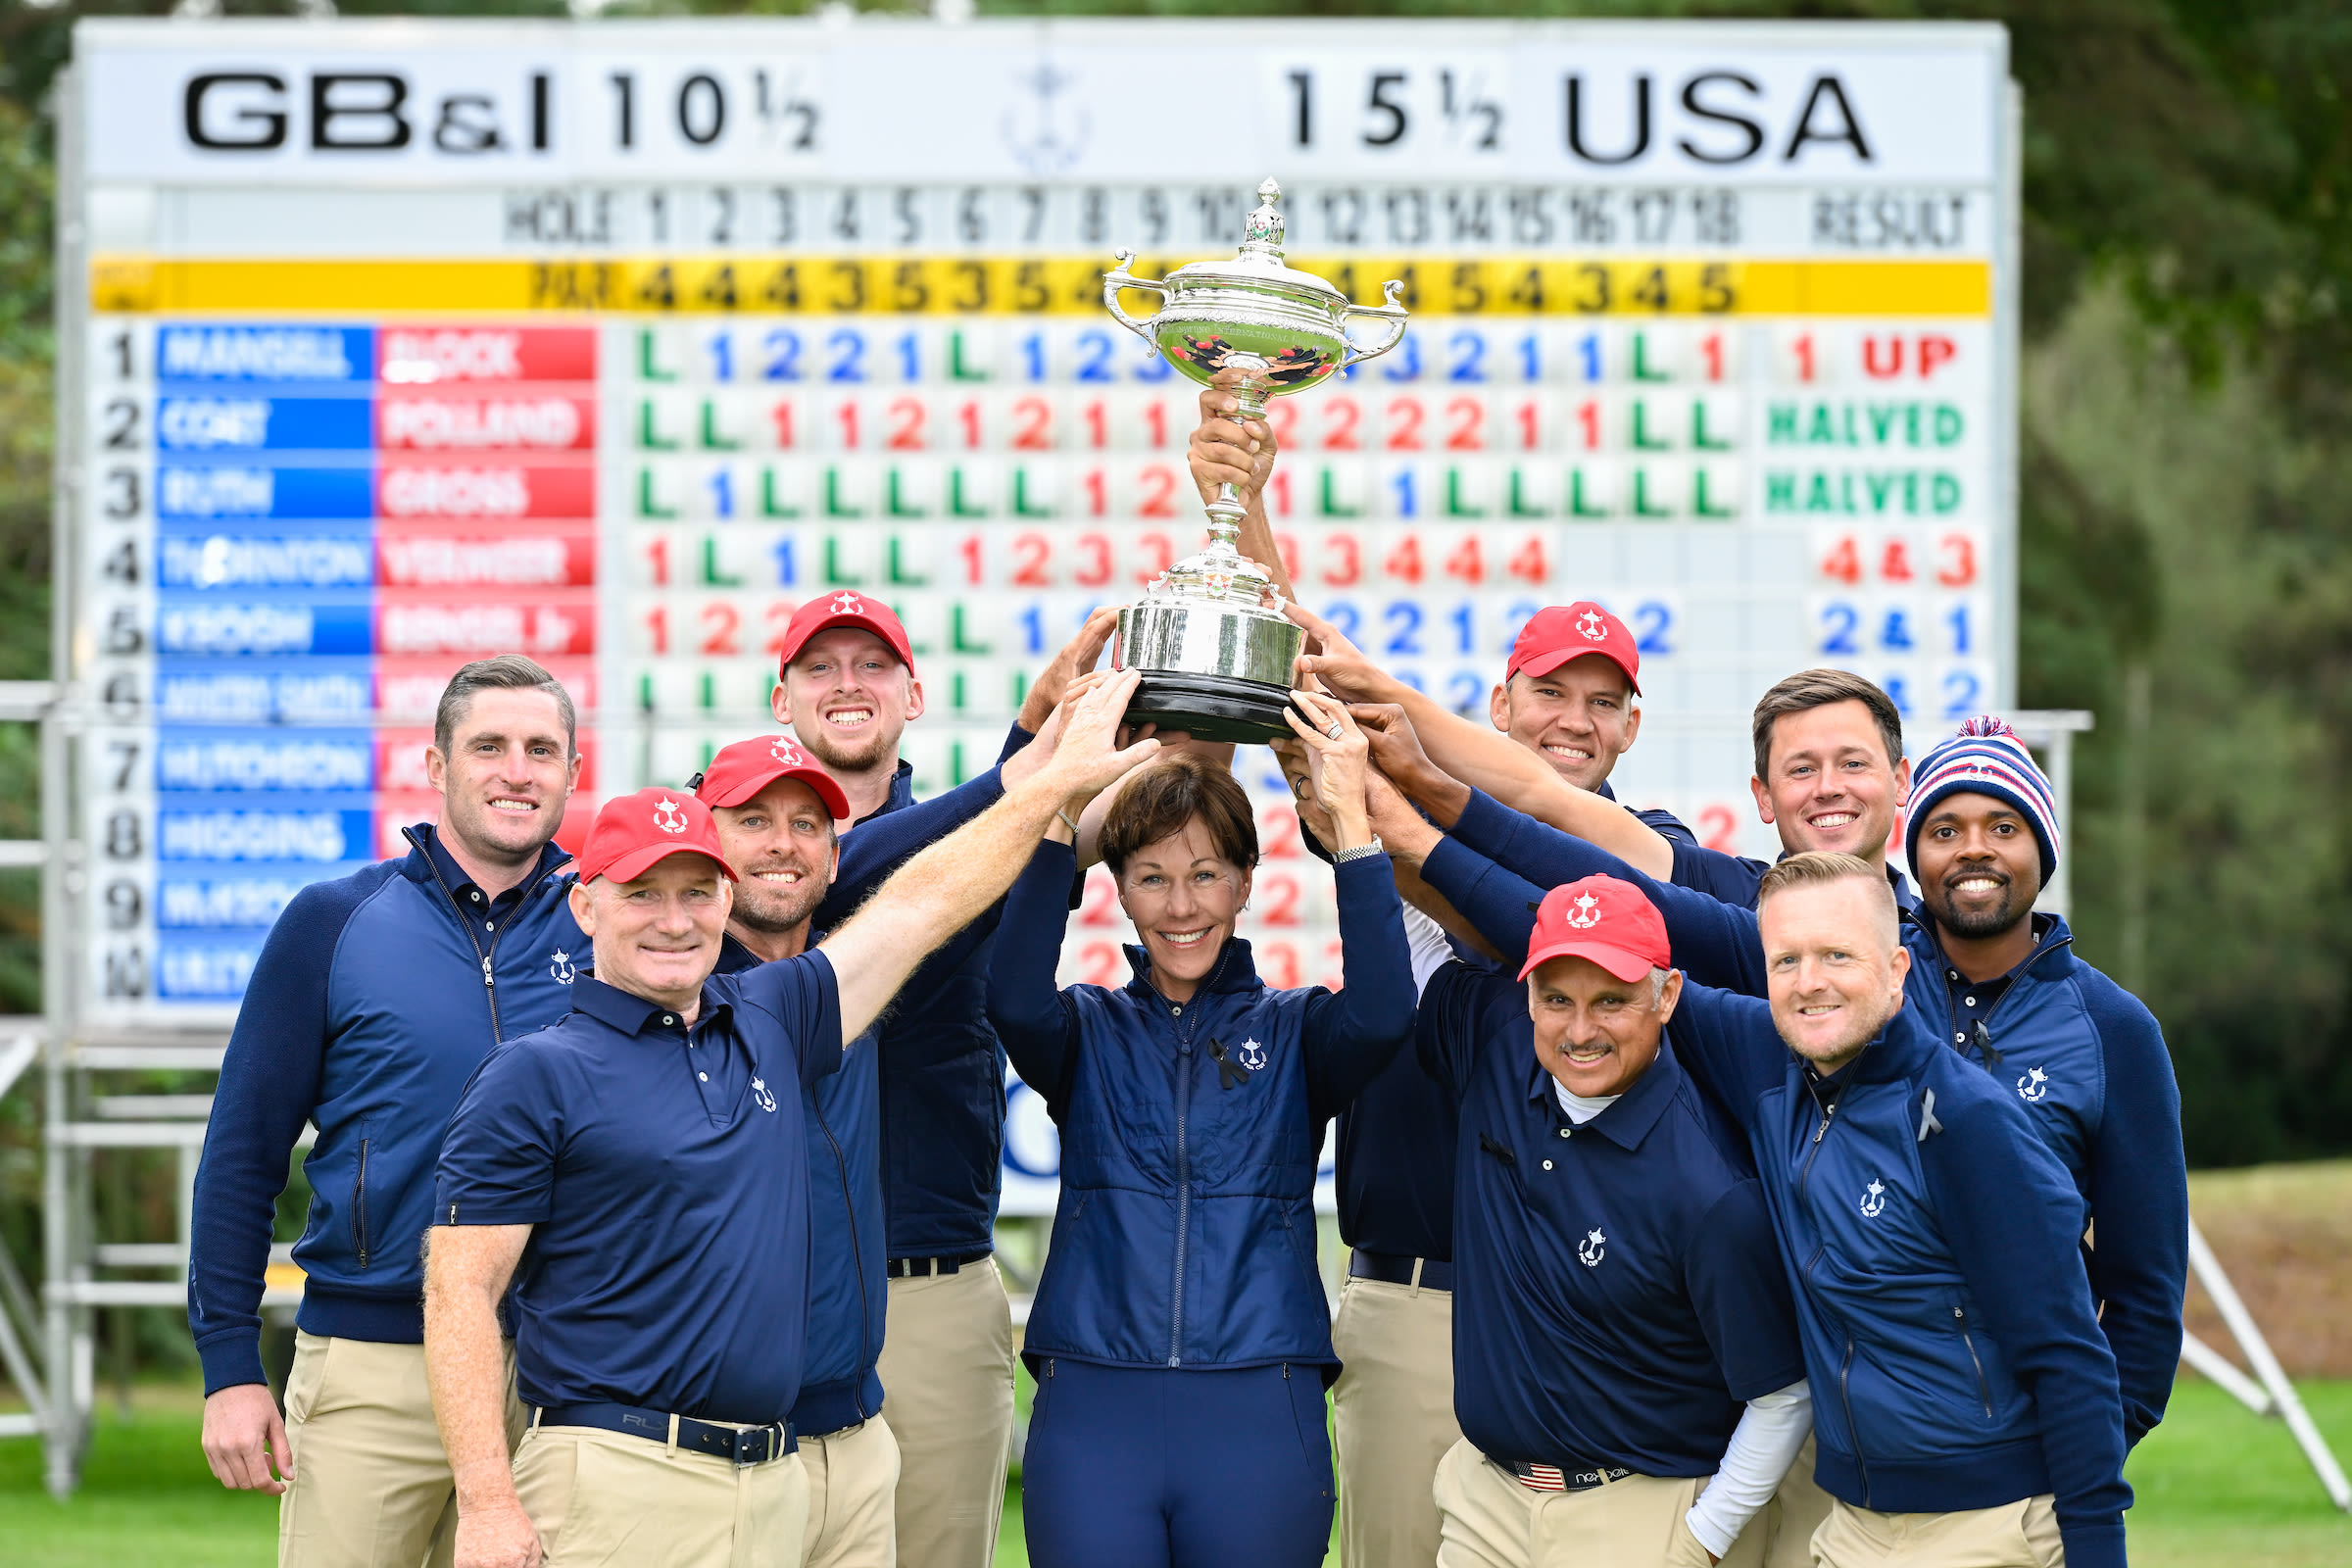 Whaley was served as captain of last year's victorious U.S. PGA Cup Team.